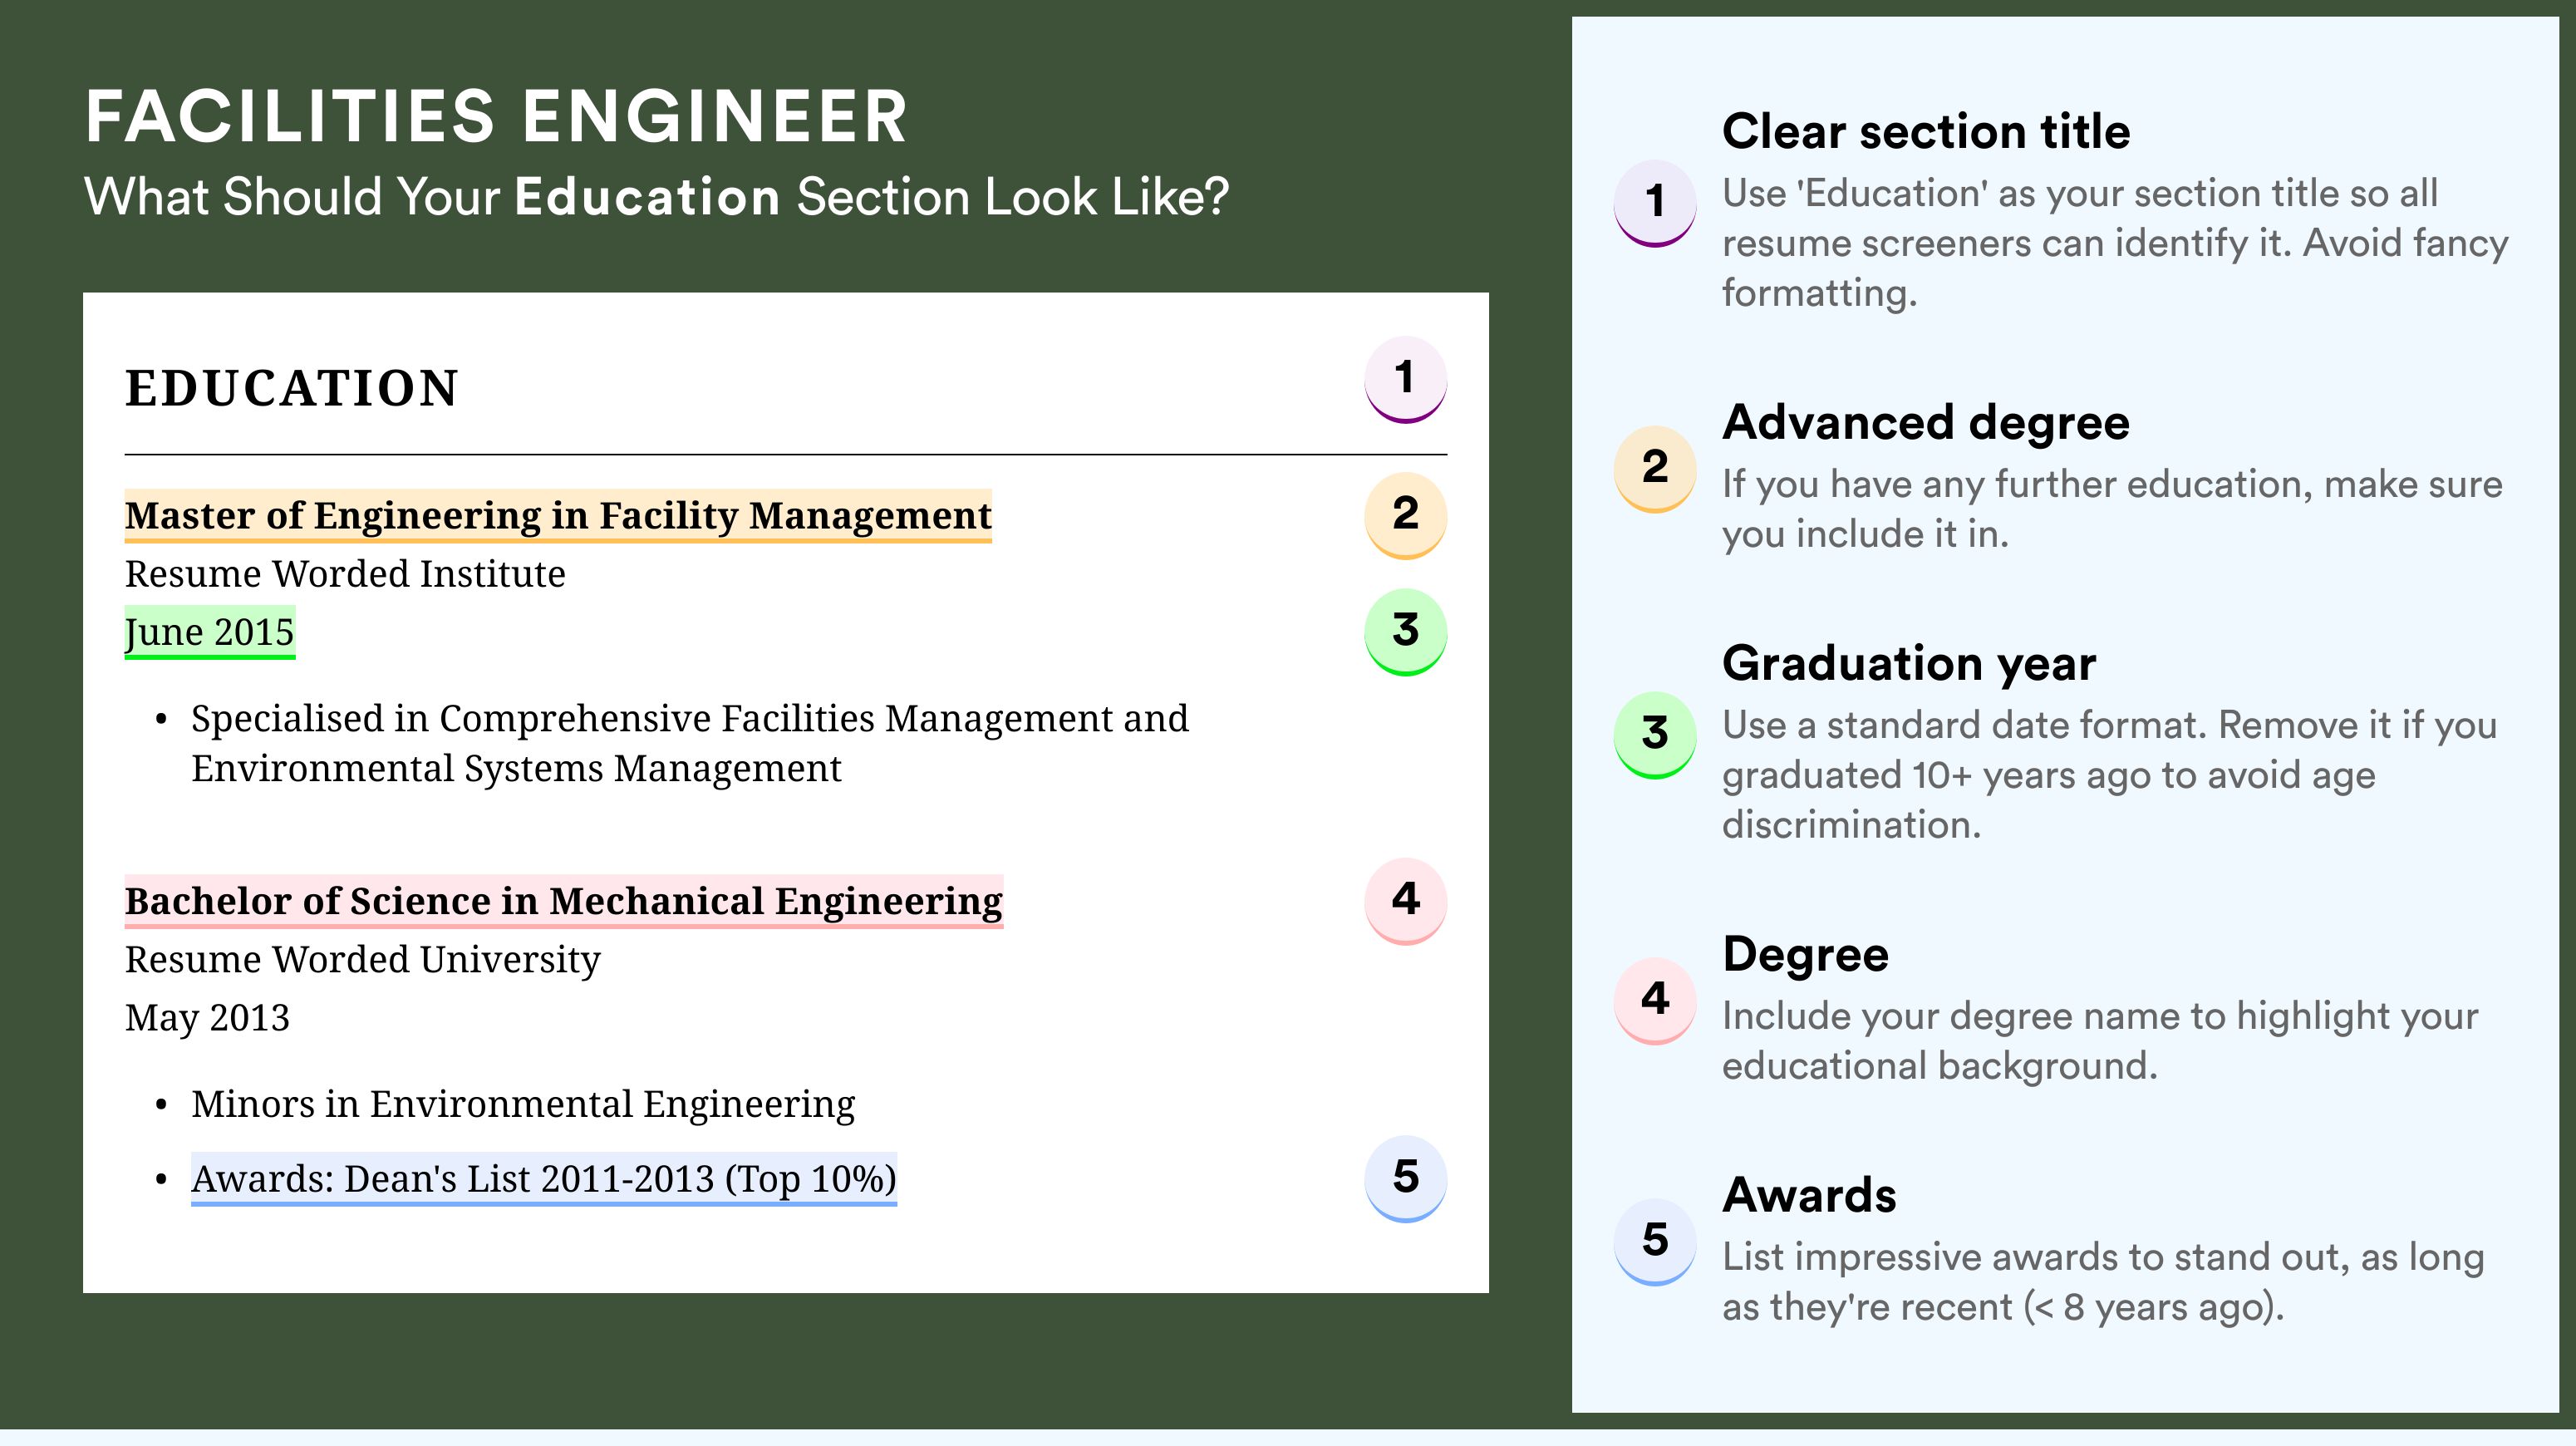 How To Write An Education Section - Facilities Engineer Roles